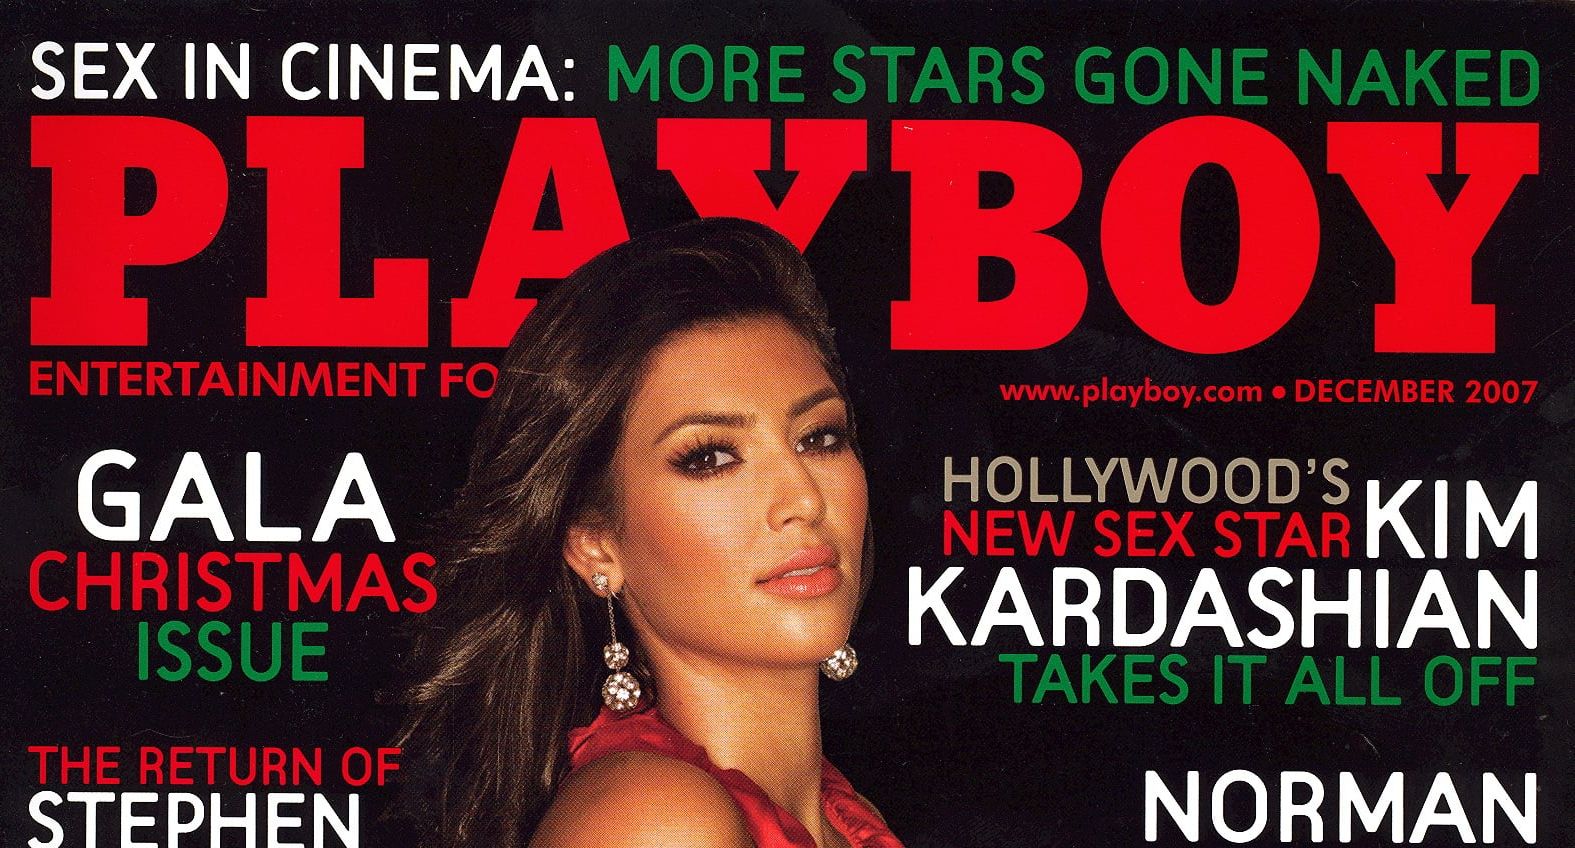 The 10 Best Selling Playboy Issues Of All Time Hottest Payment Model's...